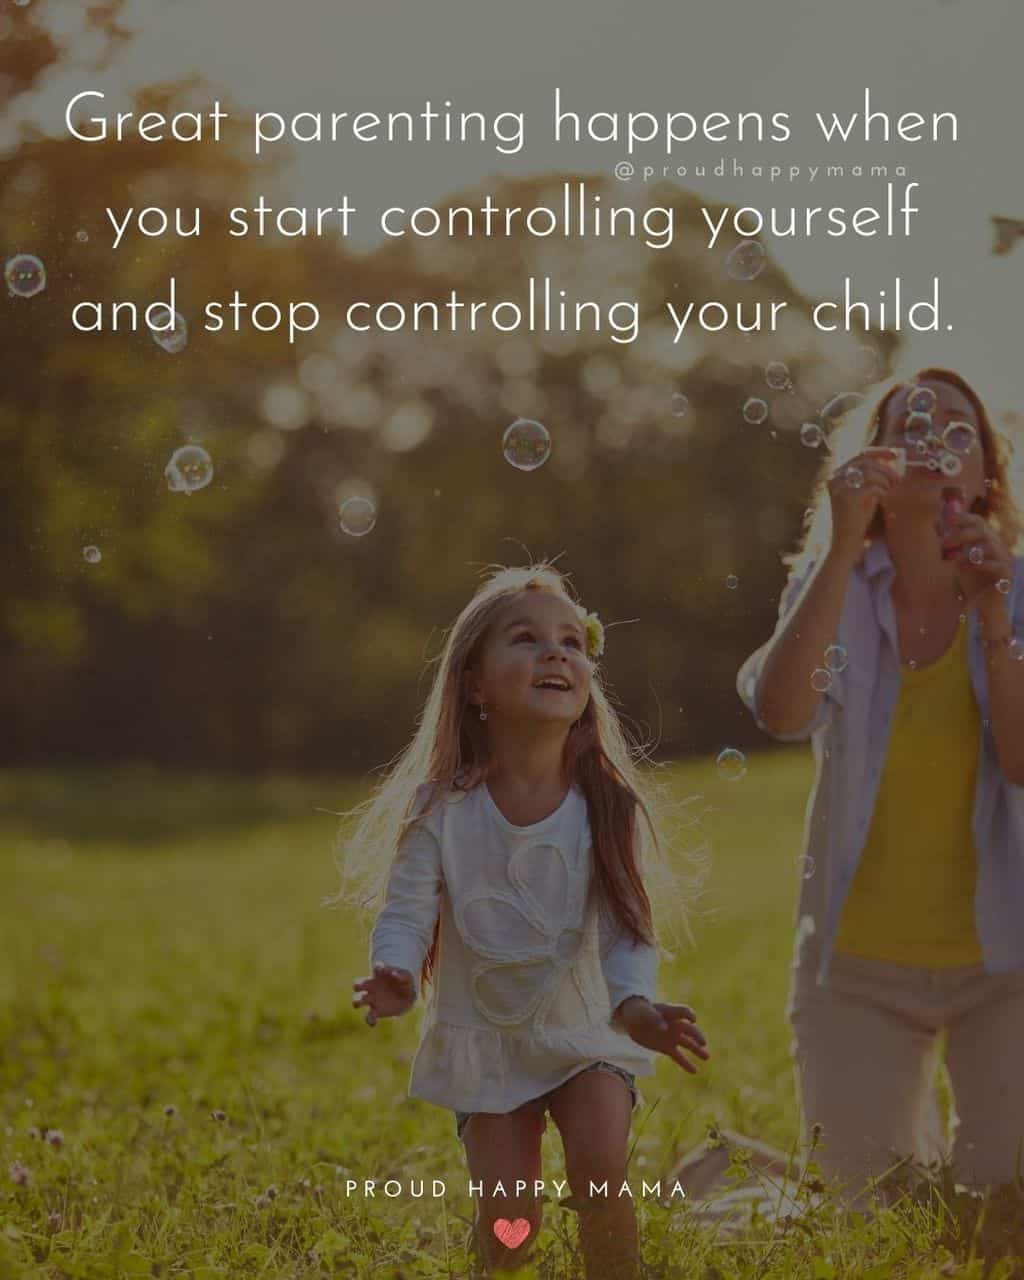 Parenting Quotes - Great parenting happens when you start controlling yourself and stop controlling your child.’